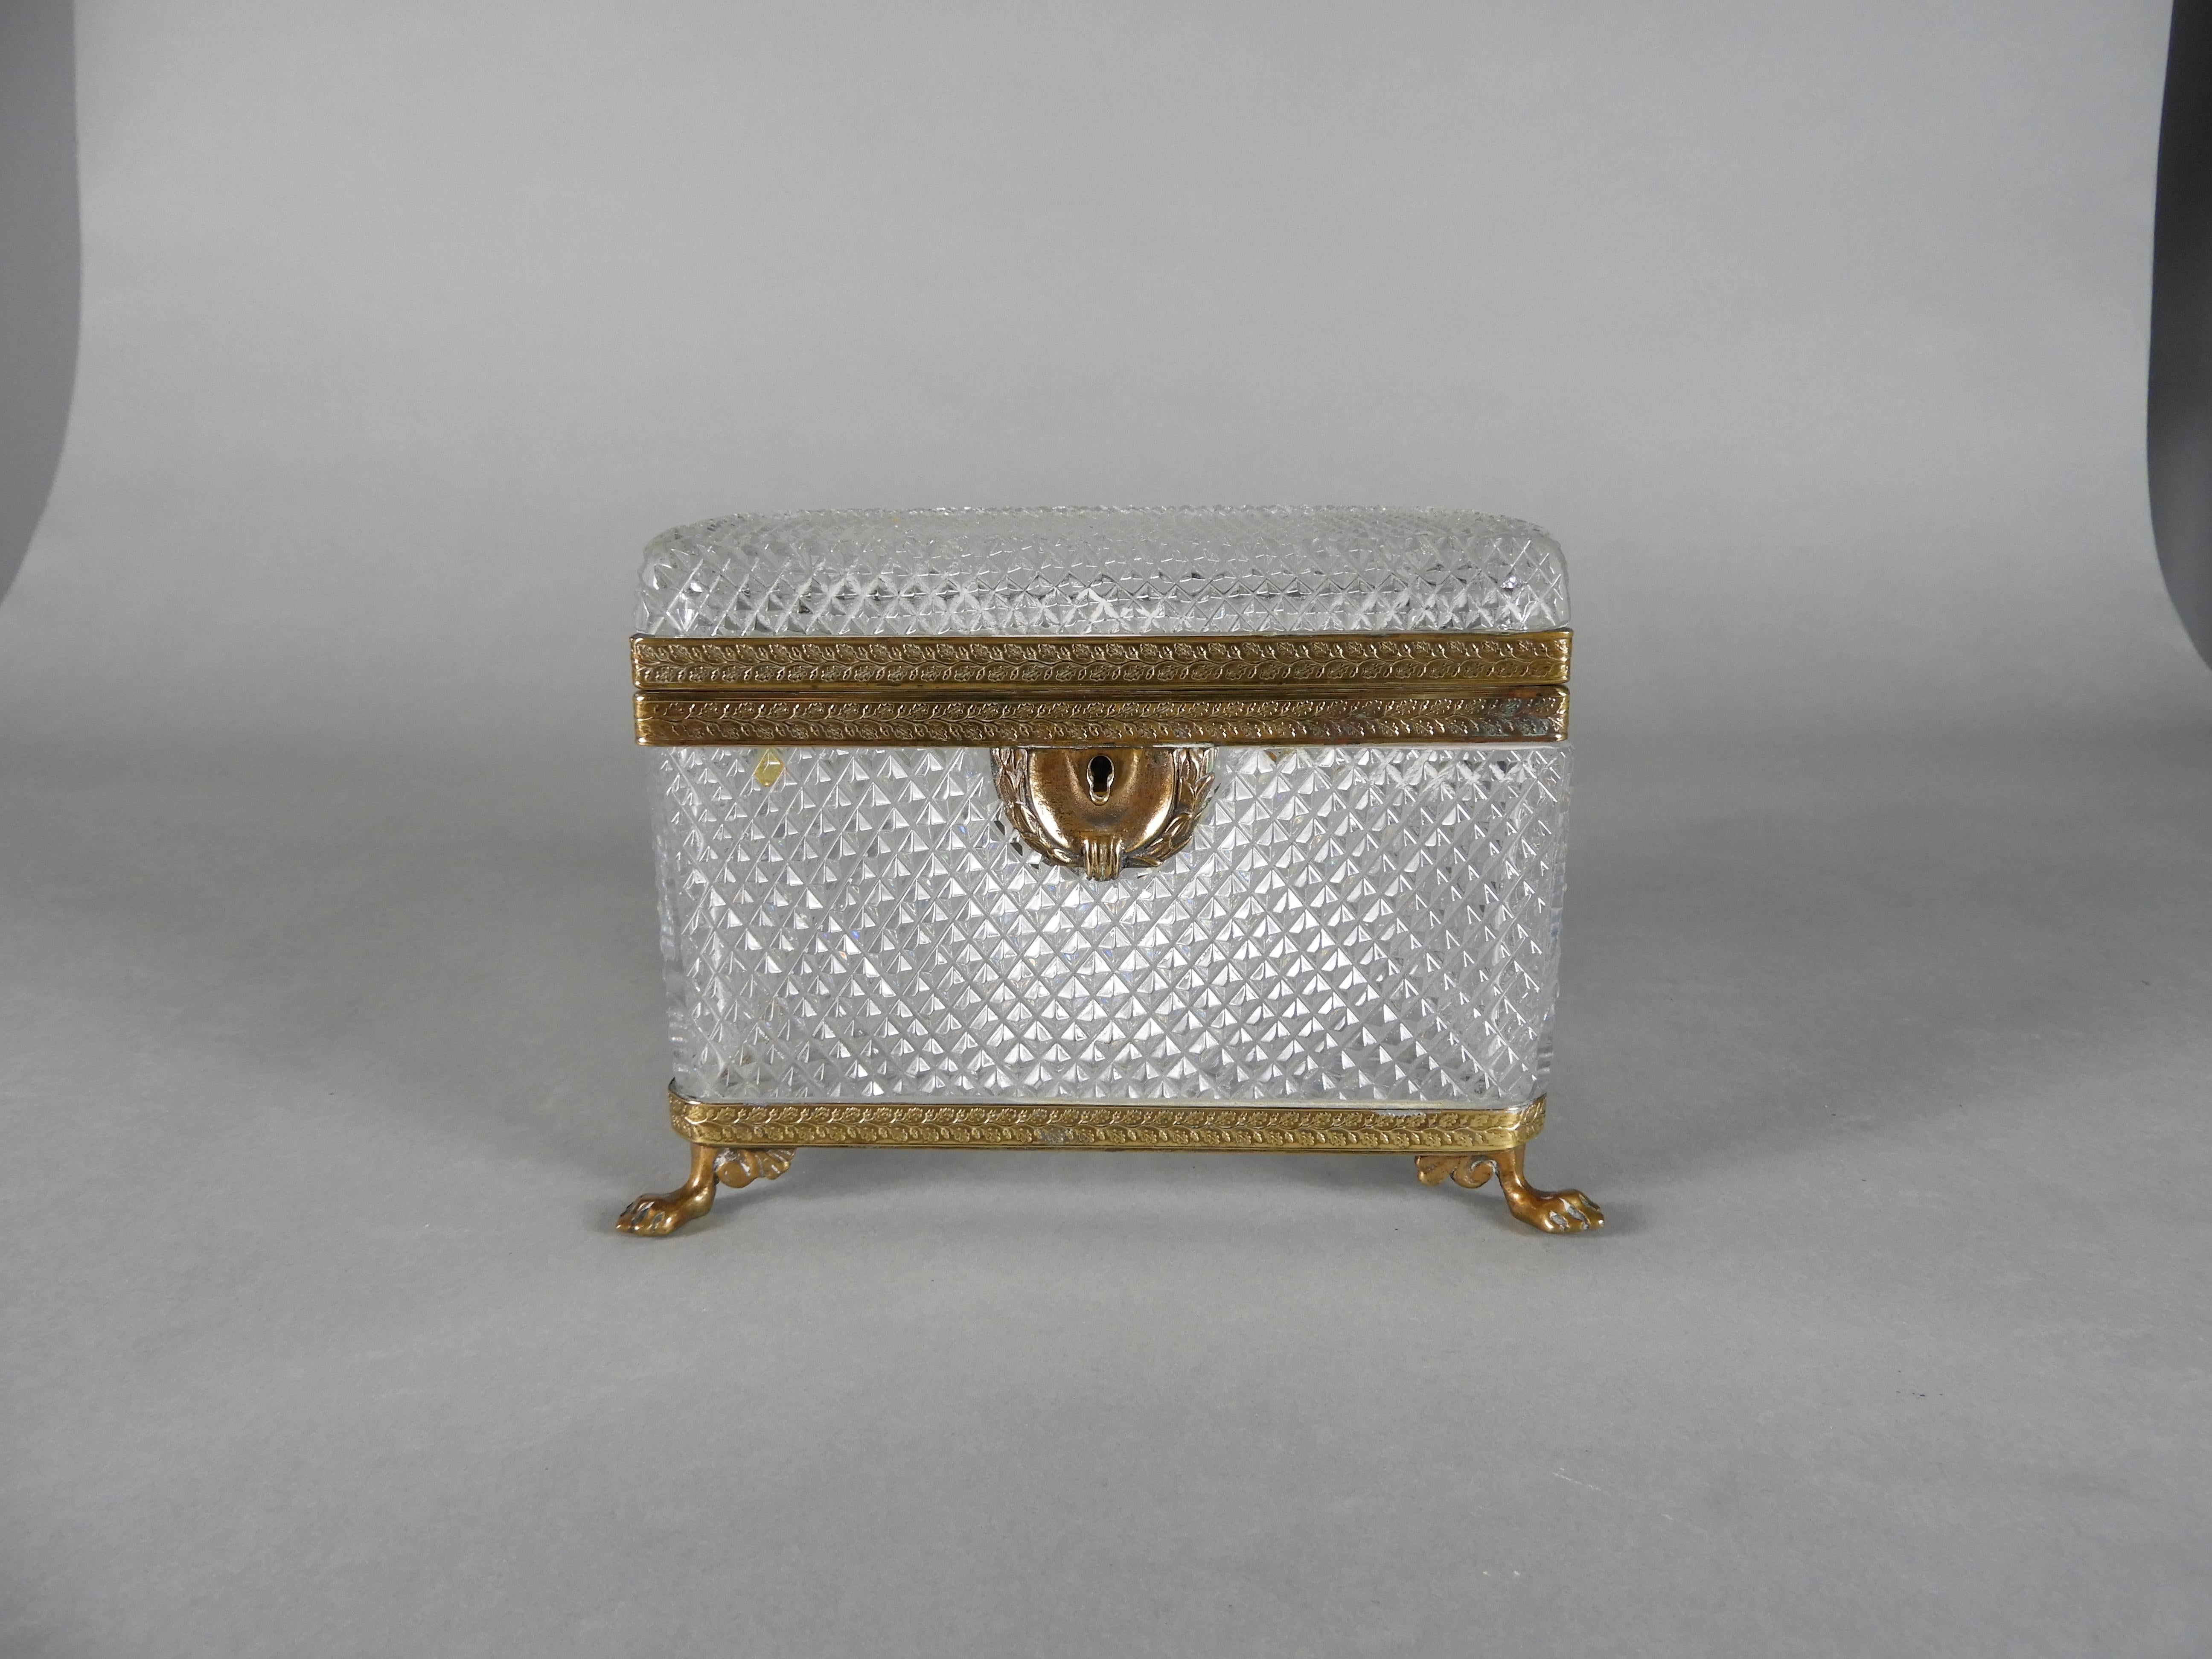 This large well-cut cuboid shaped box is of a type much favored by retailers of luxury items in Paris at the end of the 19th century, (and earlier). It is cut with a delicate all-over diamond pattern but with carefully chamfered edges, a mark of